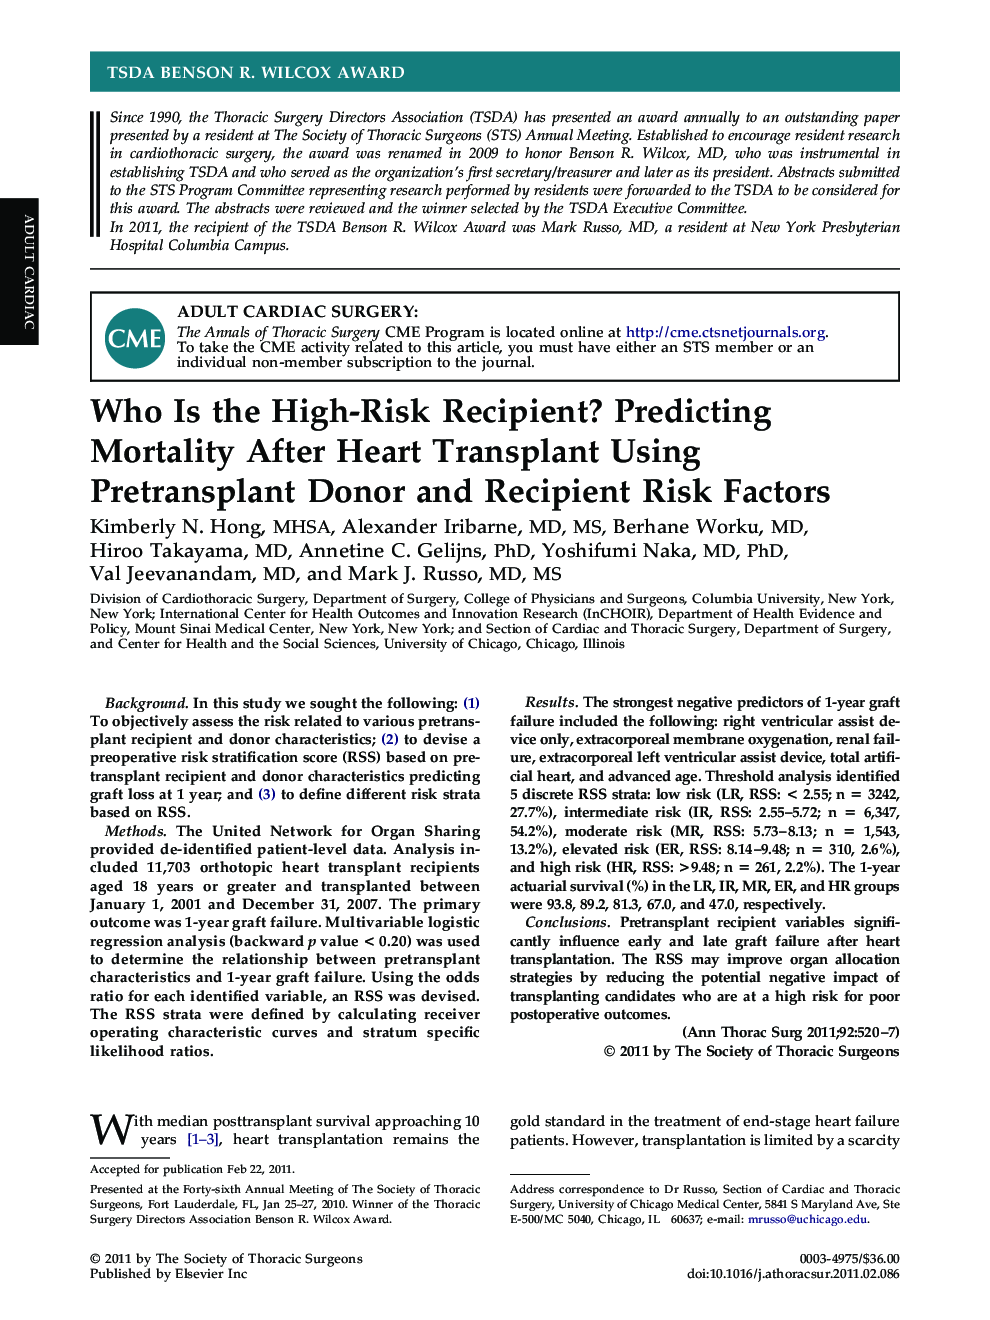 Who Is the High-Risk Recipient? Predicting Mortality After Heart Transplant Using Pretransplant Donor and Recipient Risk Factors